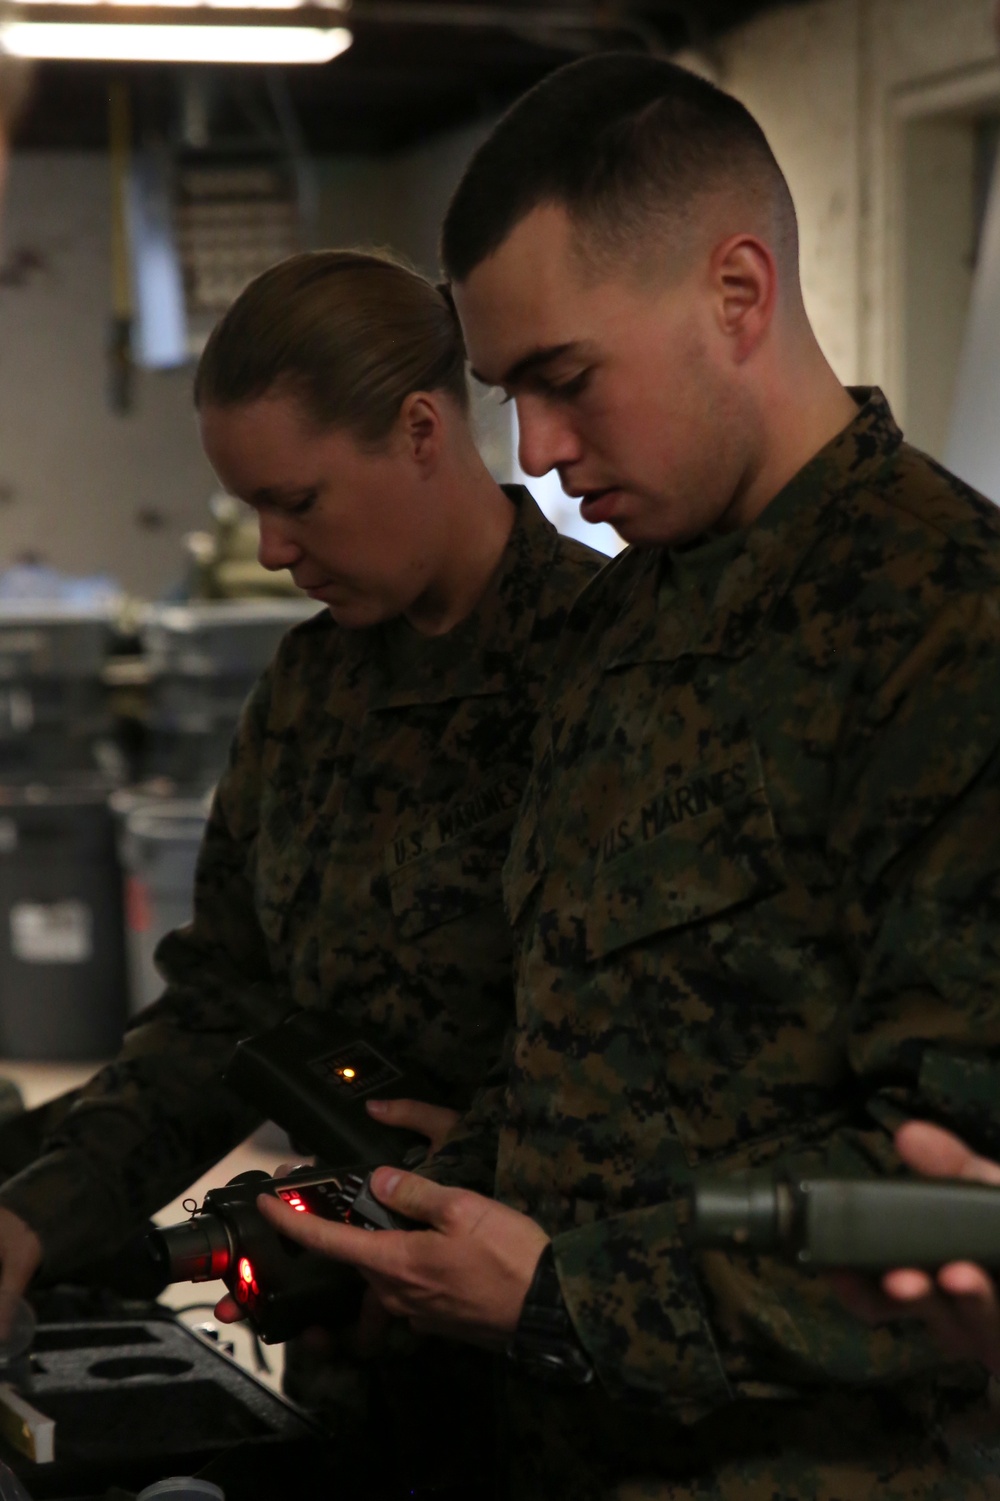 Ready for anything: Marines train for CBRN response